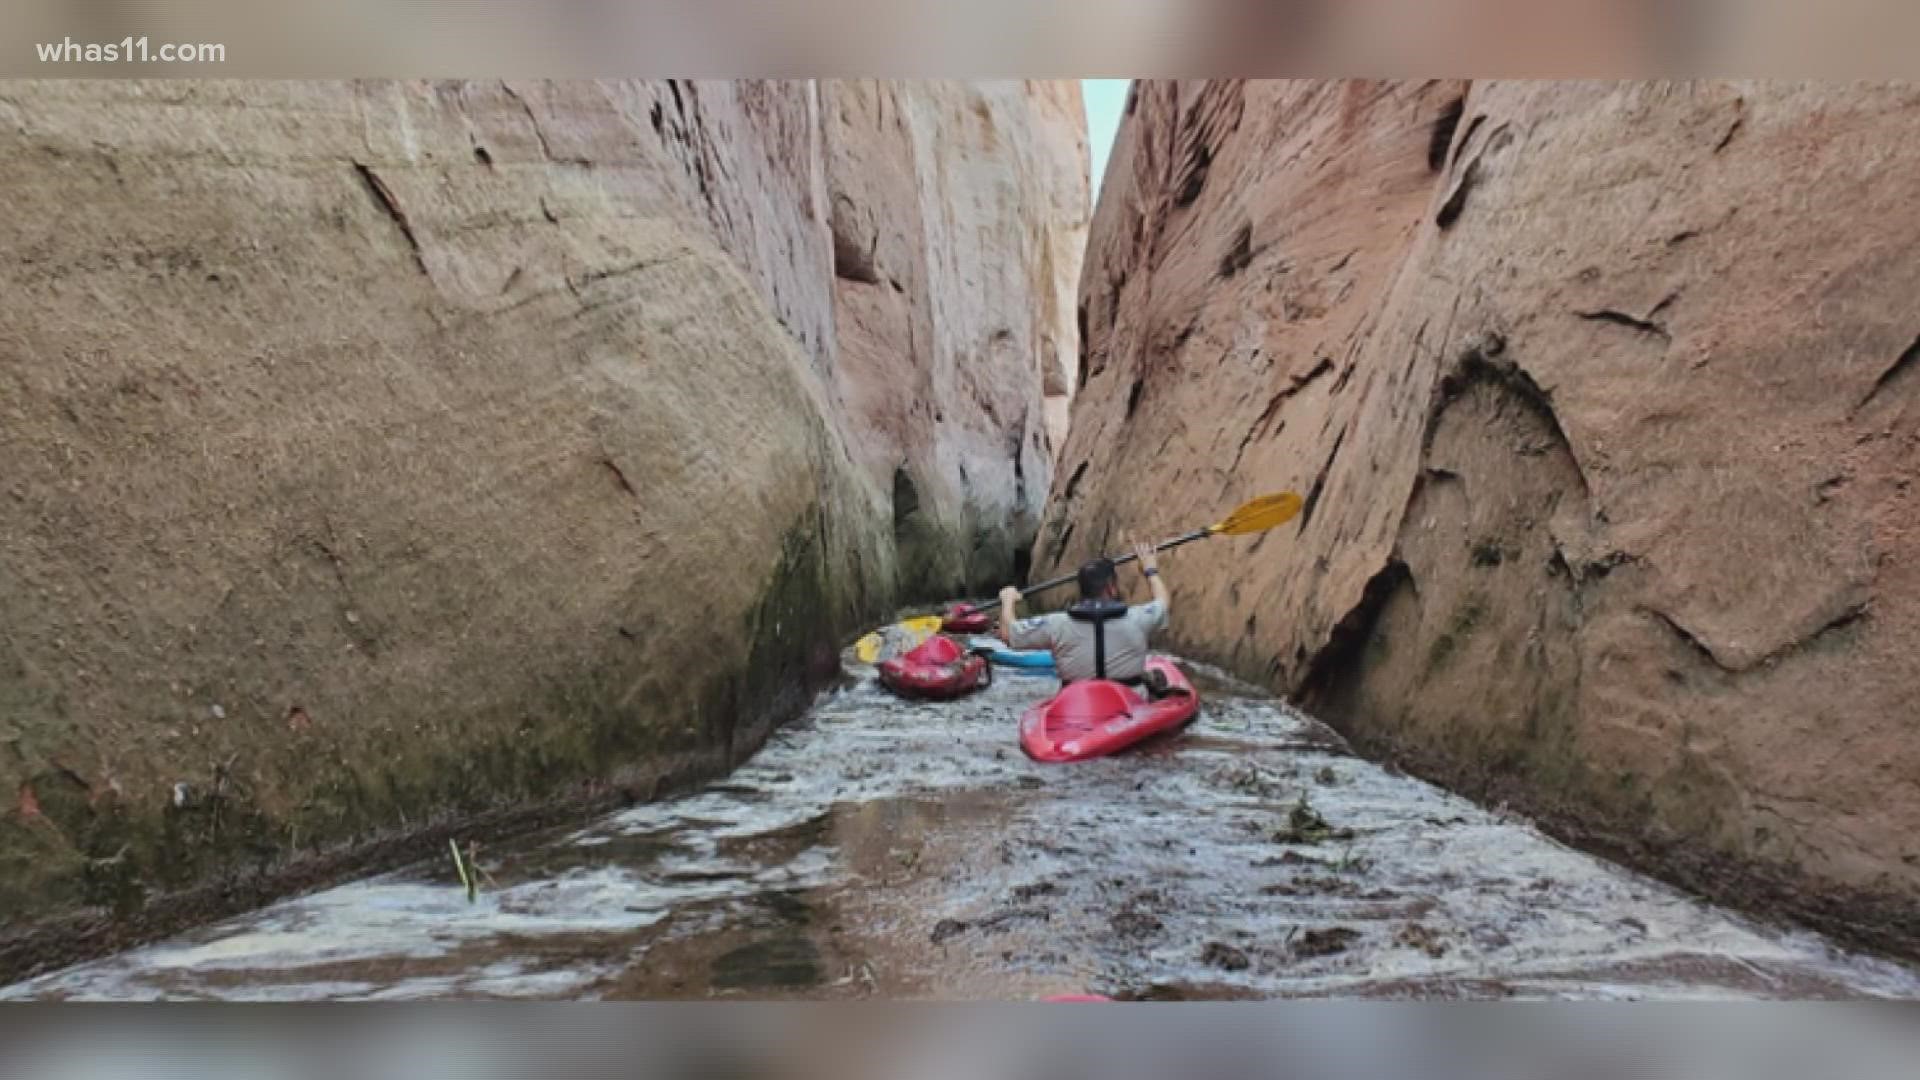 Police said 43-year-old Heather Rutledge was with her family when they were caught in a flash flood near the Arizona-Utah border.